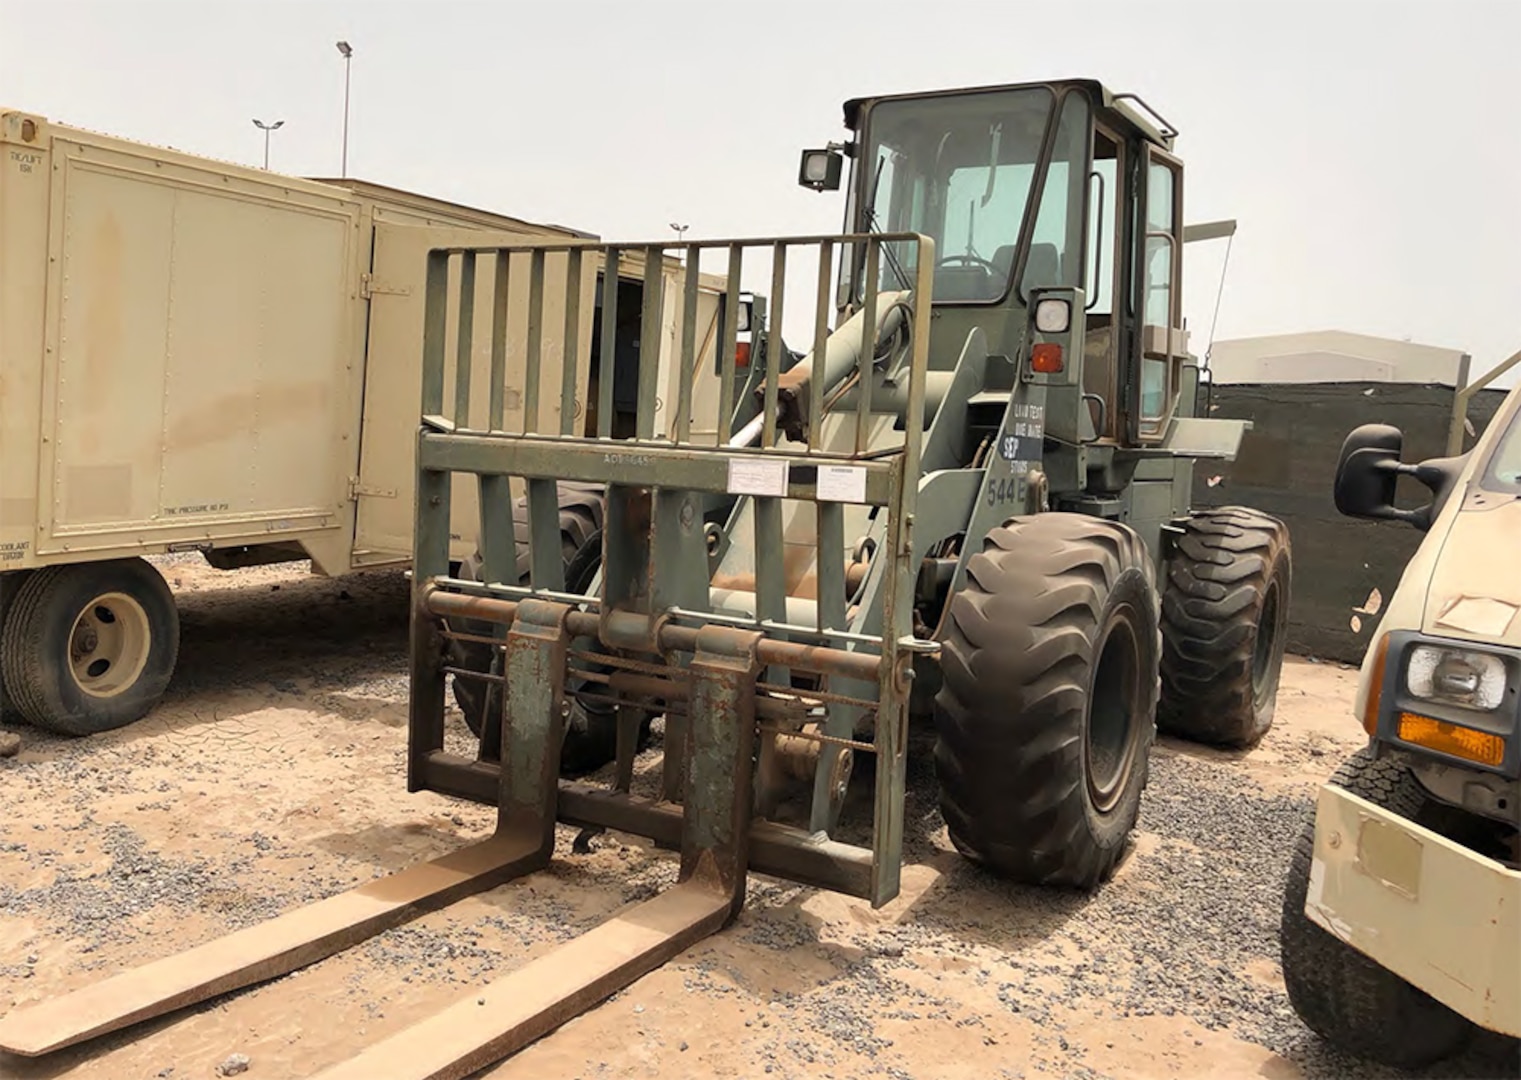 A John Deere forklift loader awaits sale at the DLA Disposition Services at Djibouti excess property yard onboard Camp Lemonnier. DLA recently completed its very first usable excess property sale on the continent of Africa.